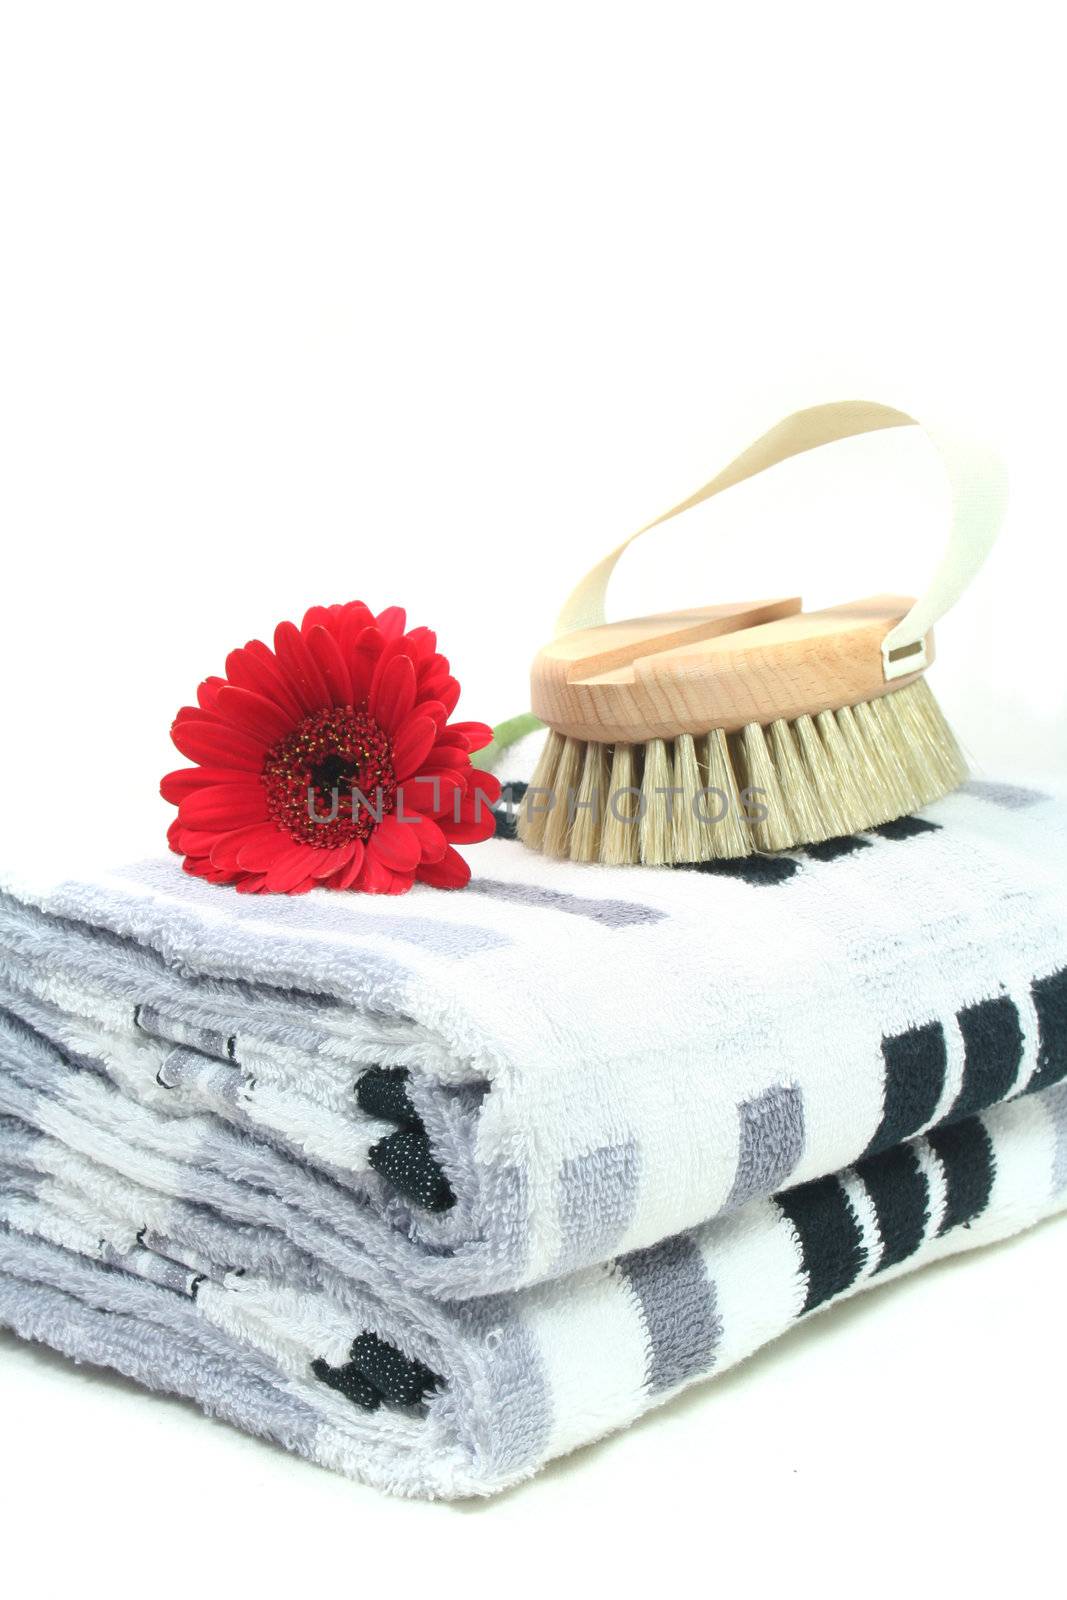 Wellness - brush, flowers and towels - Personal Care